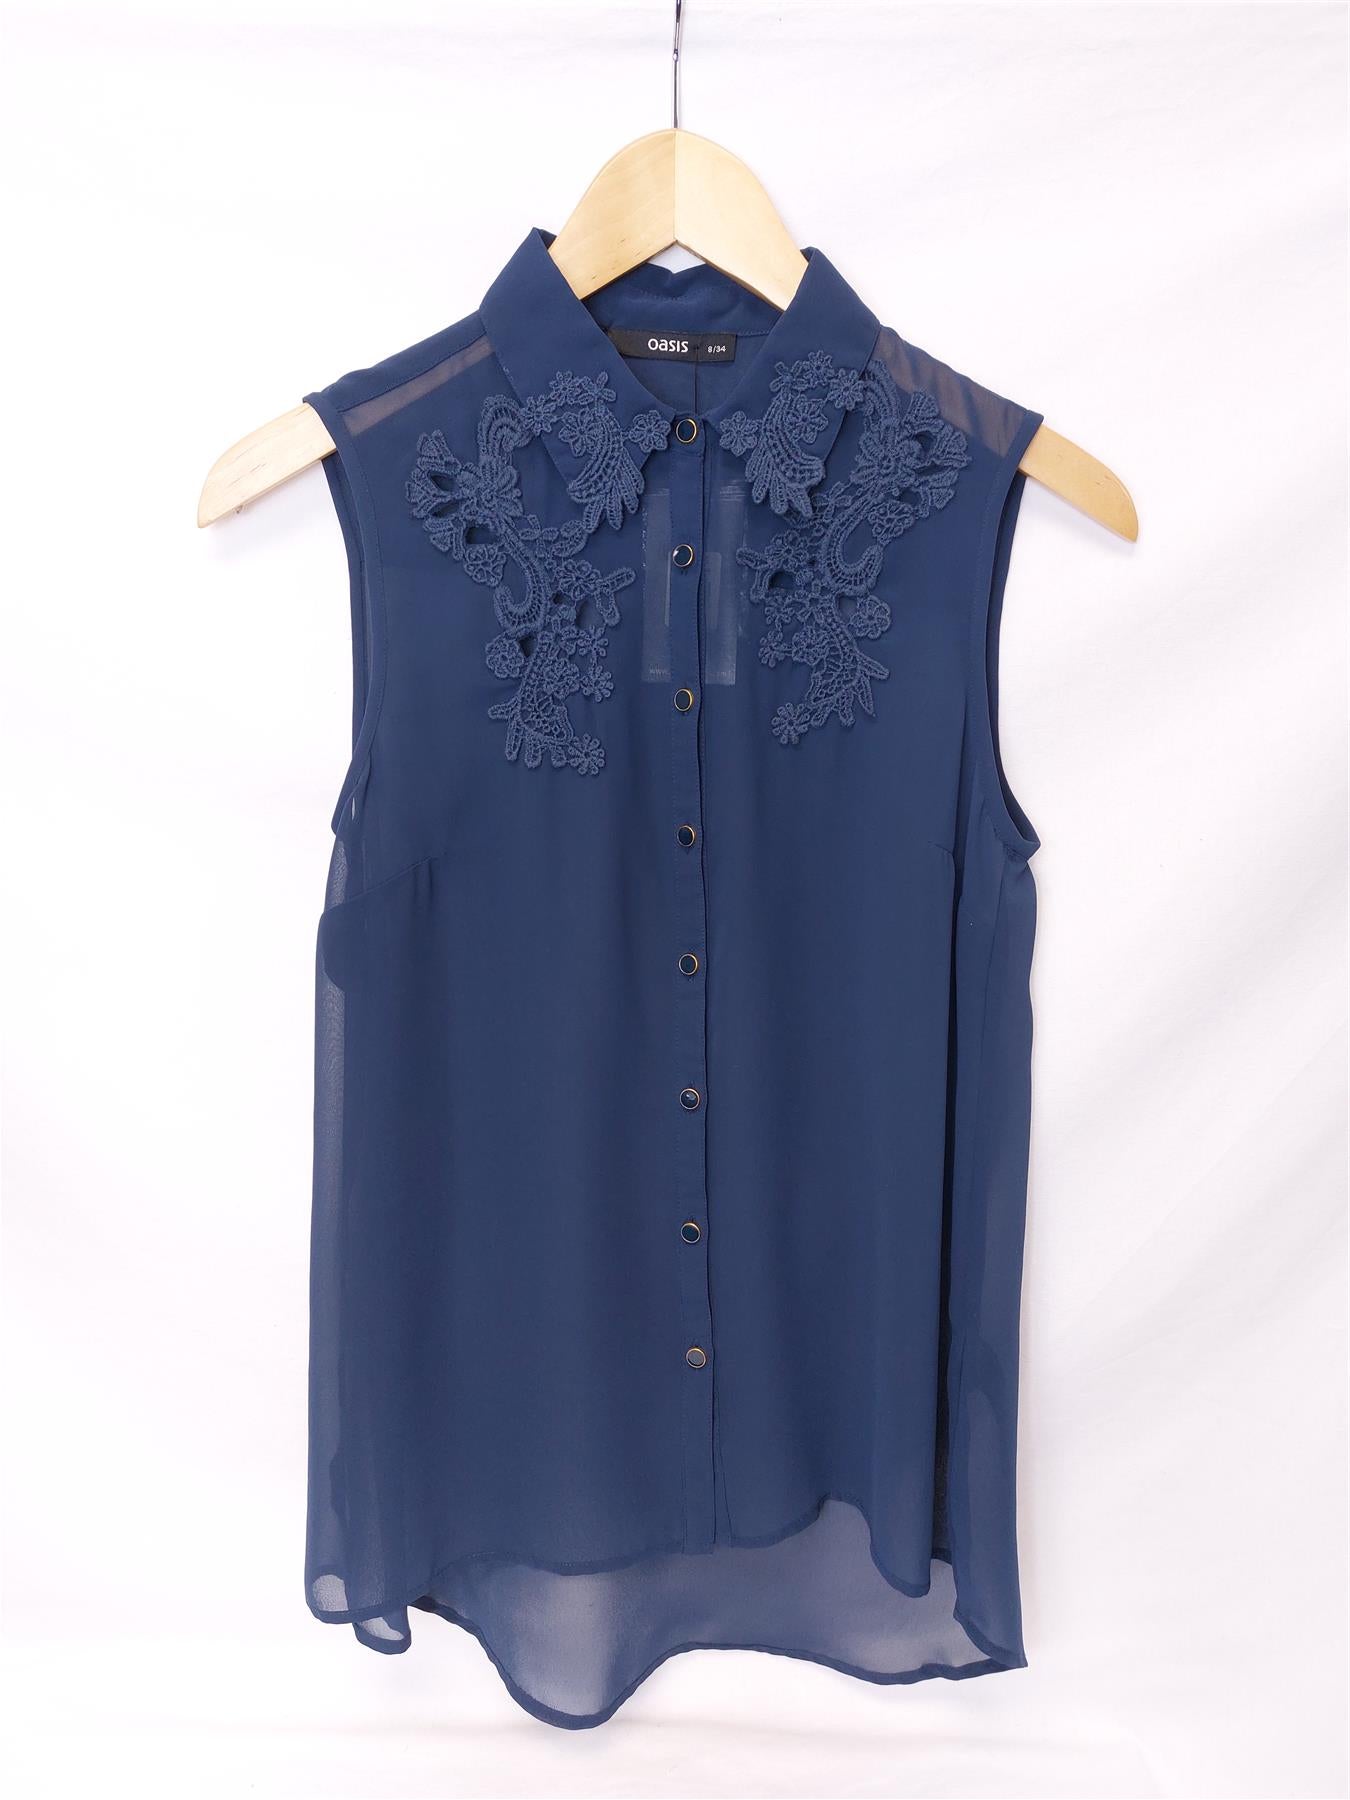 New Oasis Women's Blouse Navy Blue Sleeveless Sheer Lace Chiffon Embroidered Top